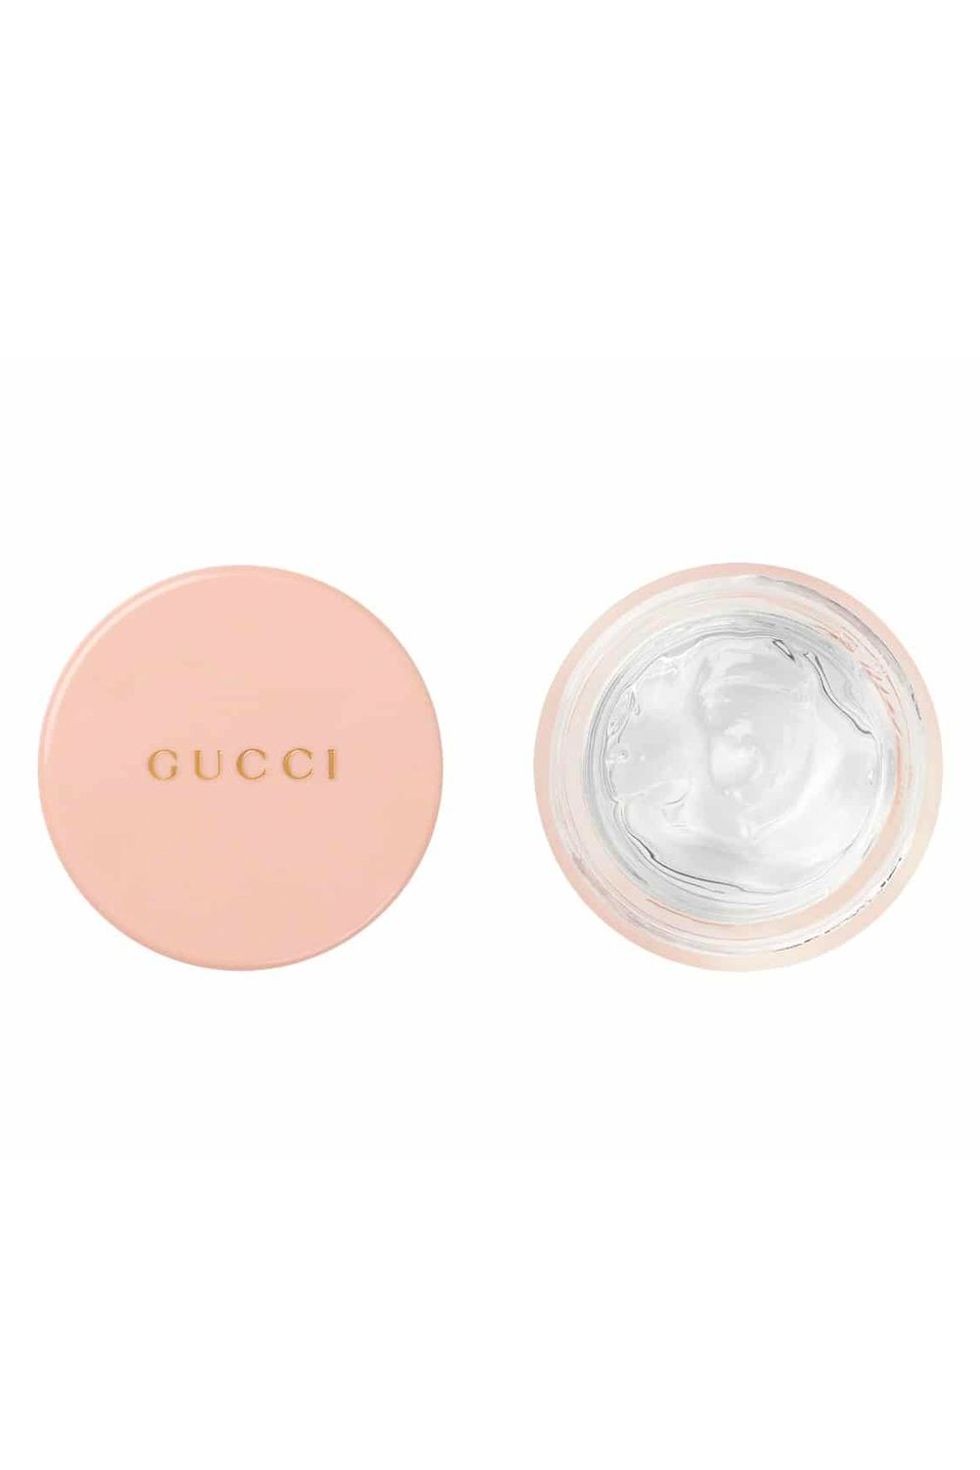 9 Best Face Glosses and Balms of 2022 for Dewy, Glowing Skin